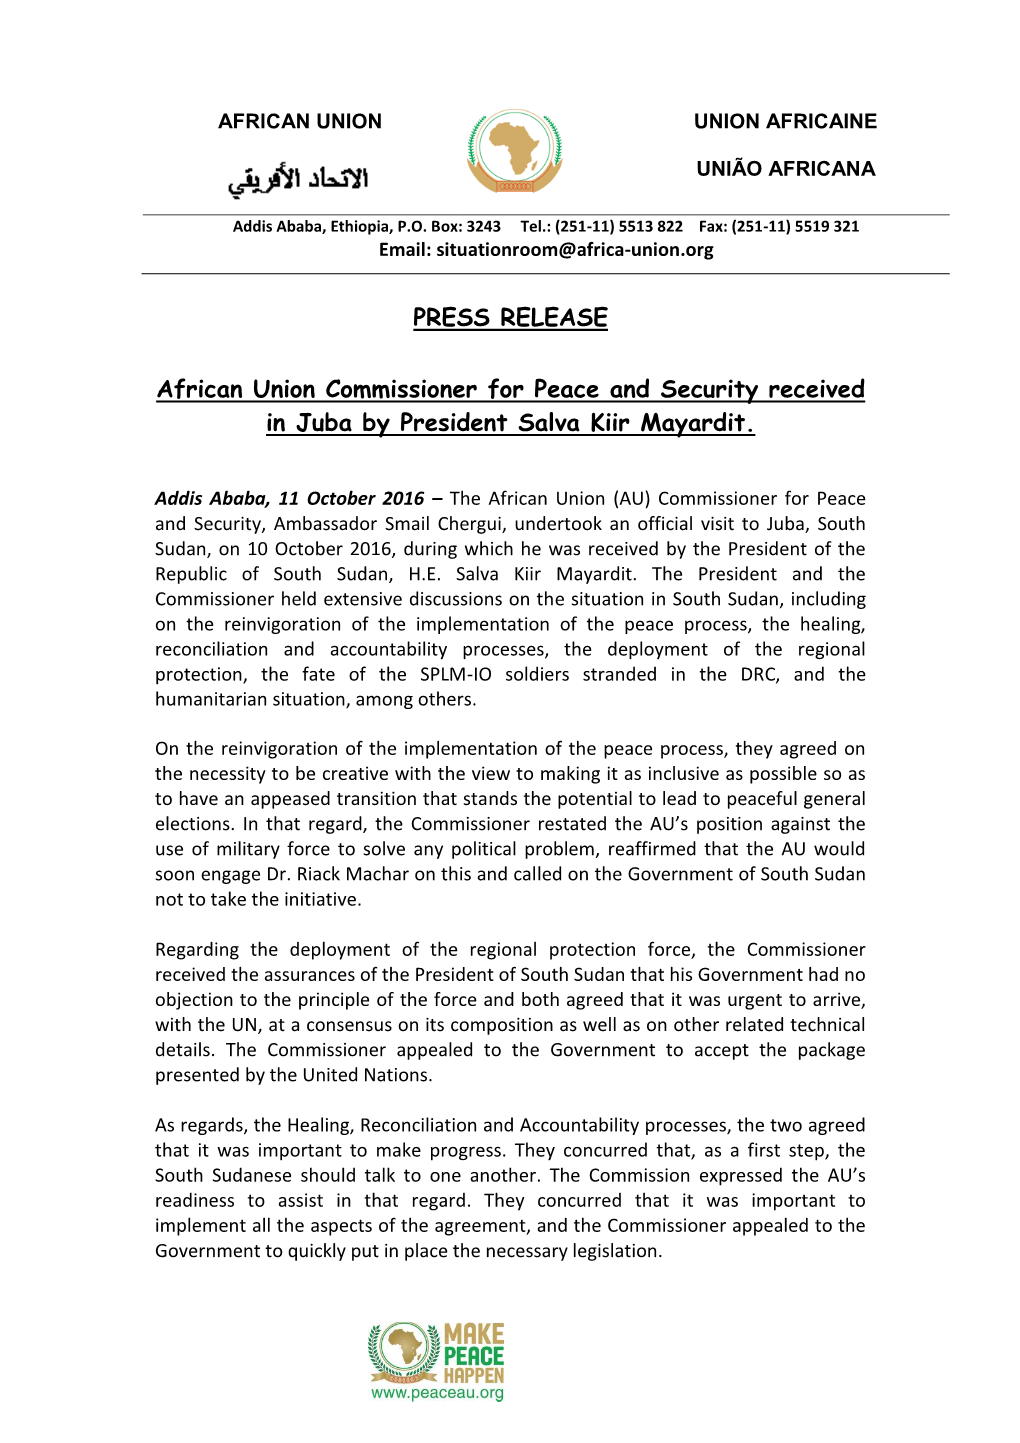 Press Release: African Union Commissioner for Peace And